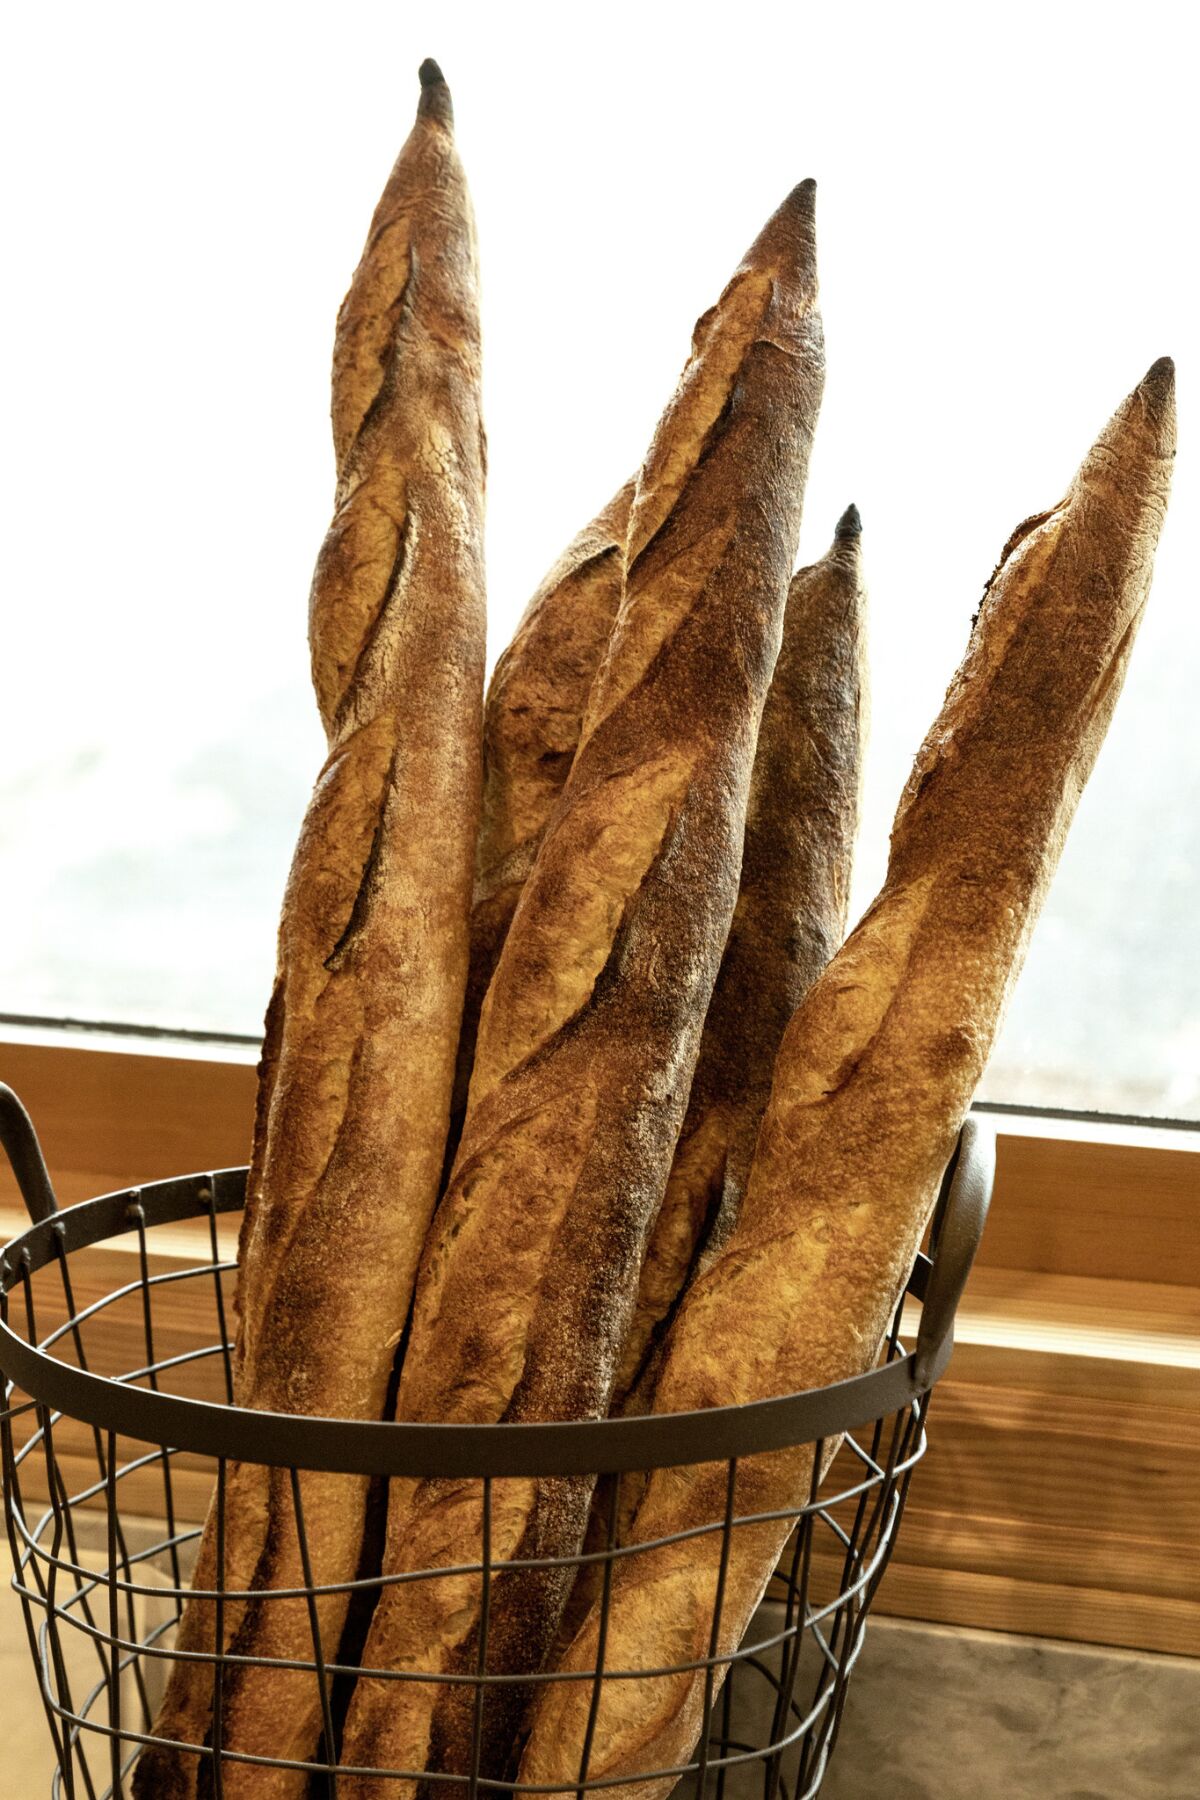 Baguettes in a basket on the pastry counter at Fiona.